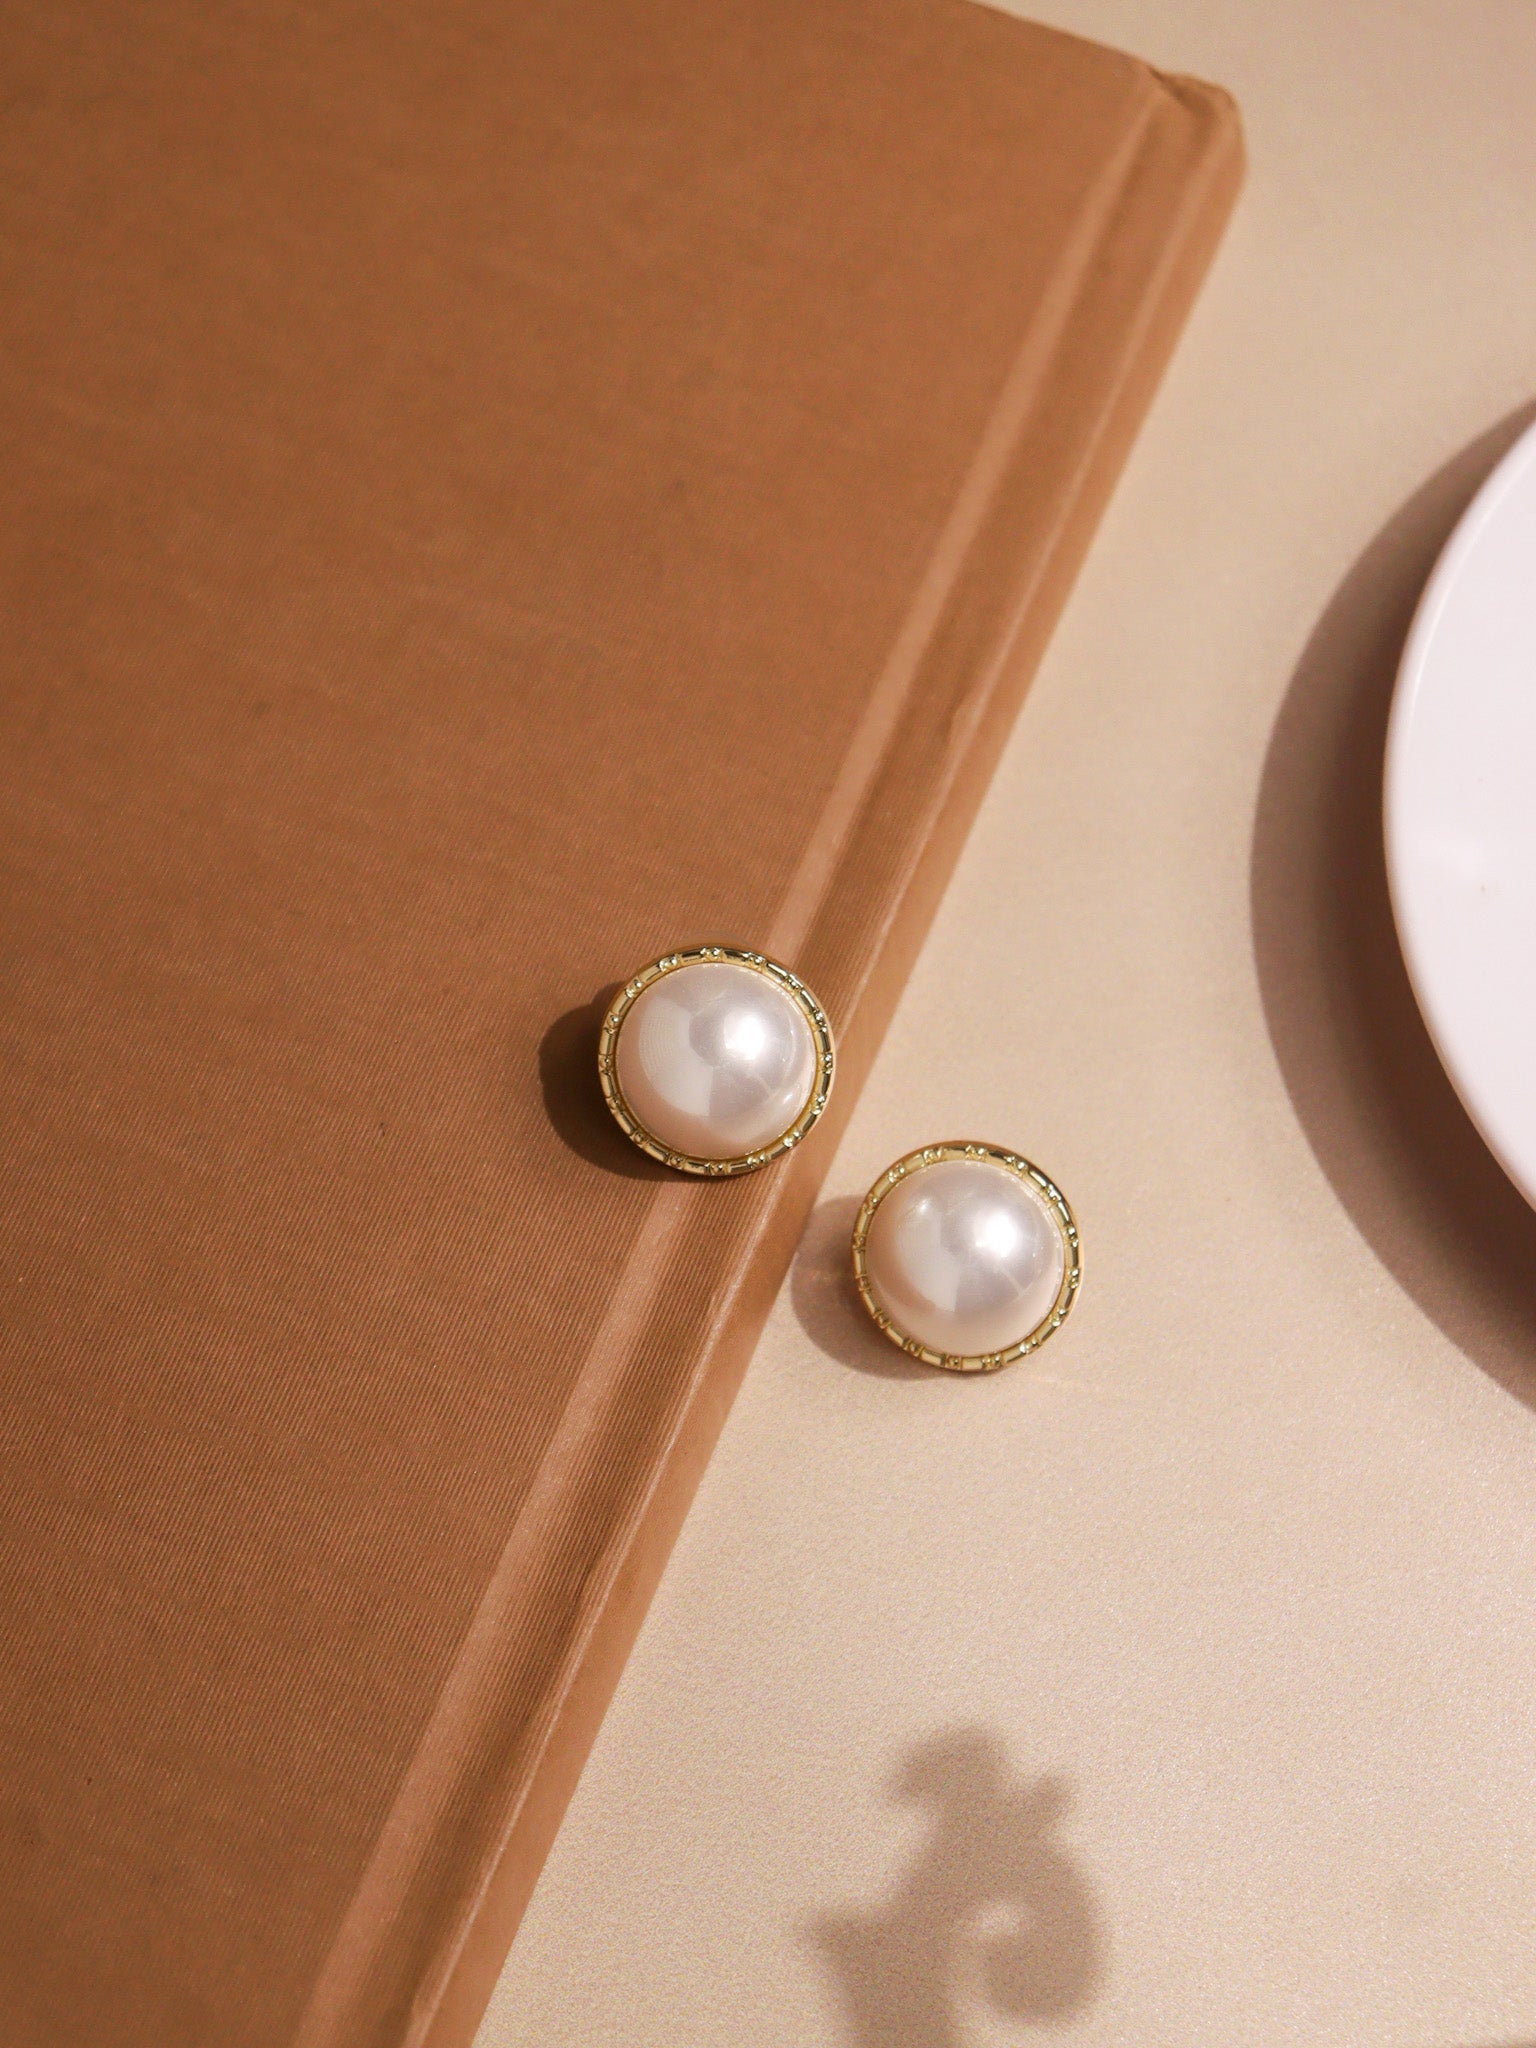  The Pearl Story - Cresent Pearl Stud Earrings